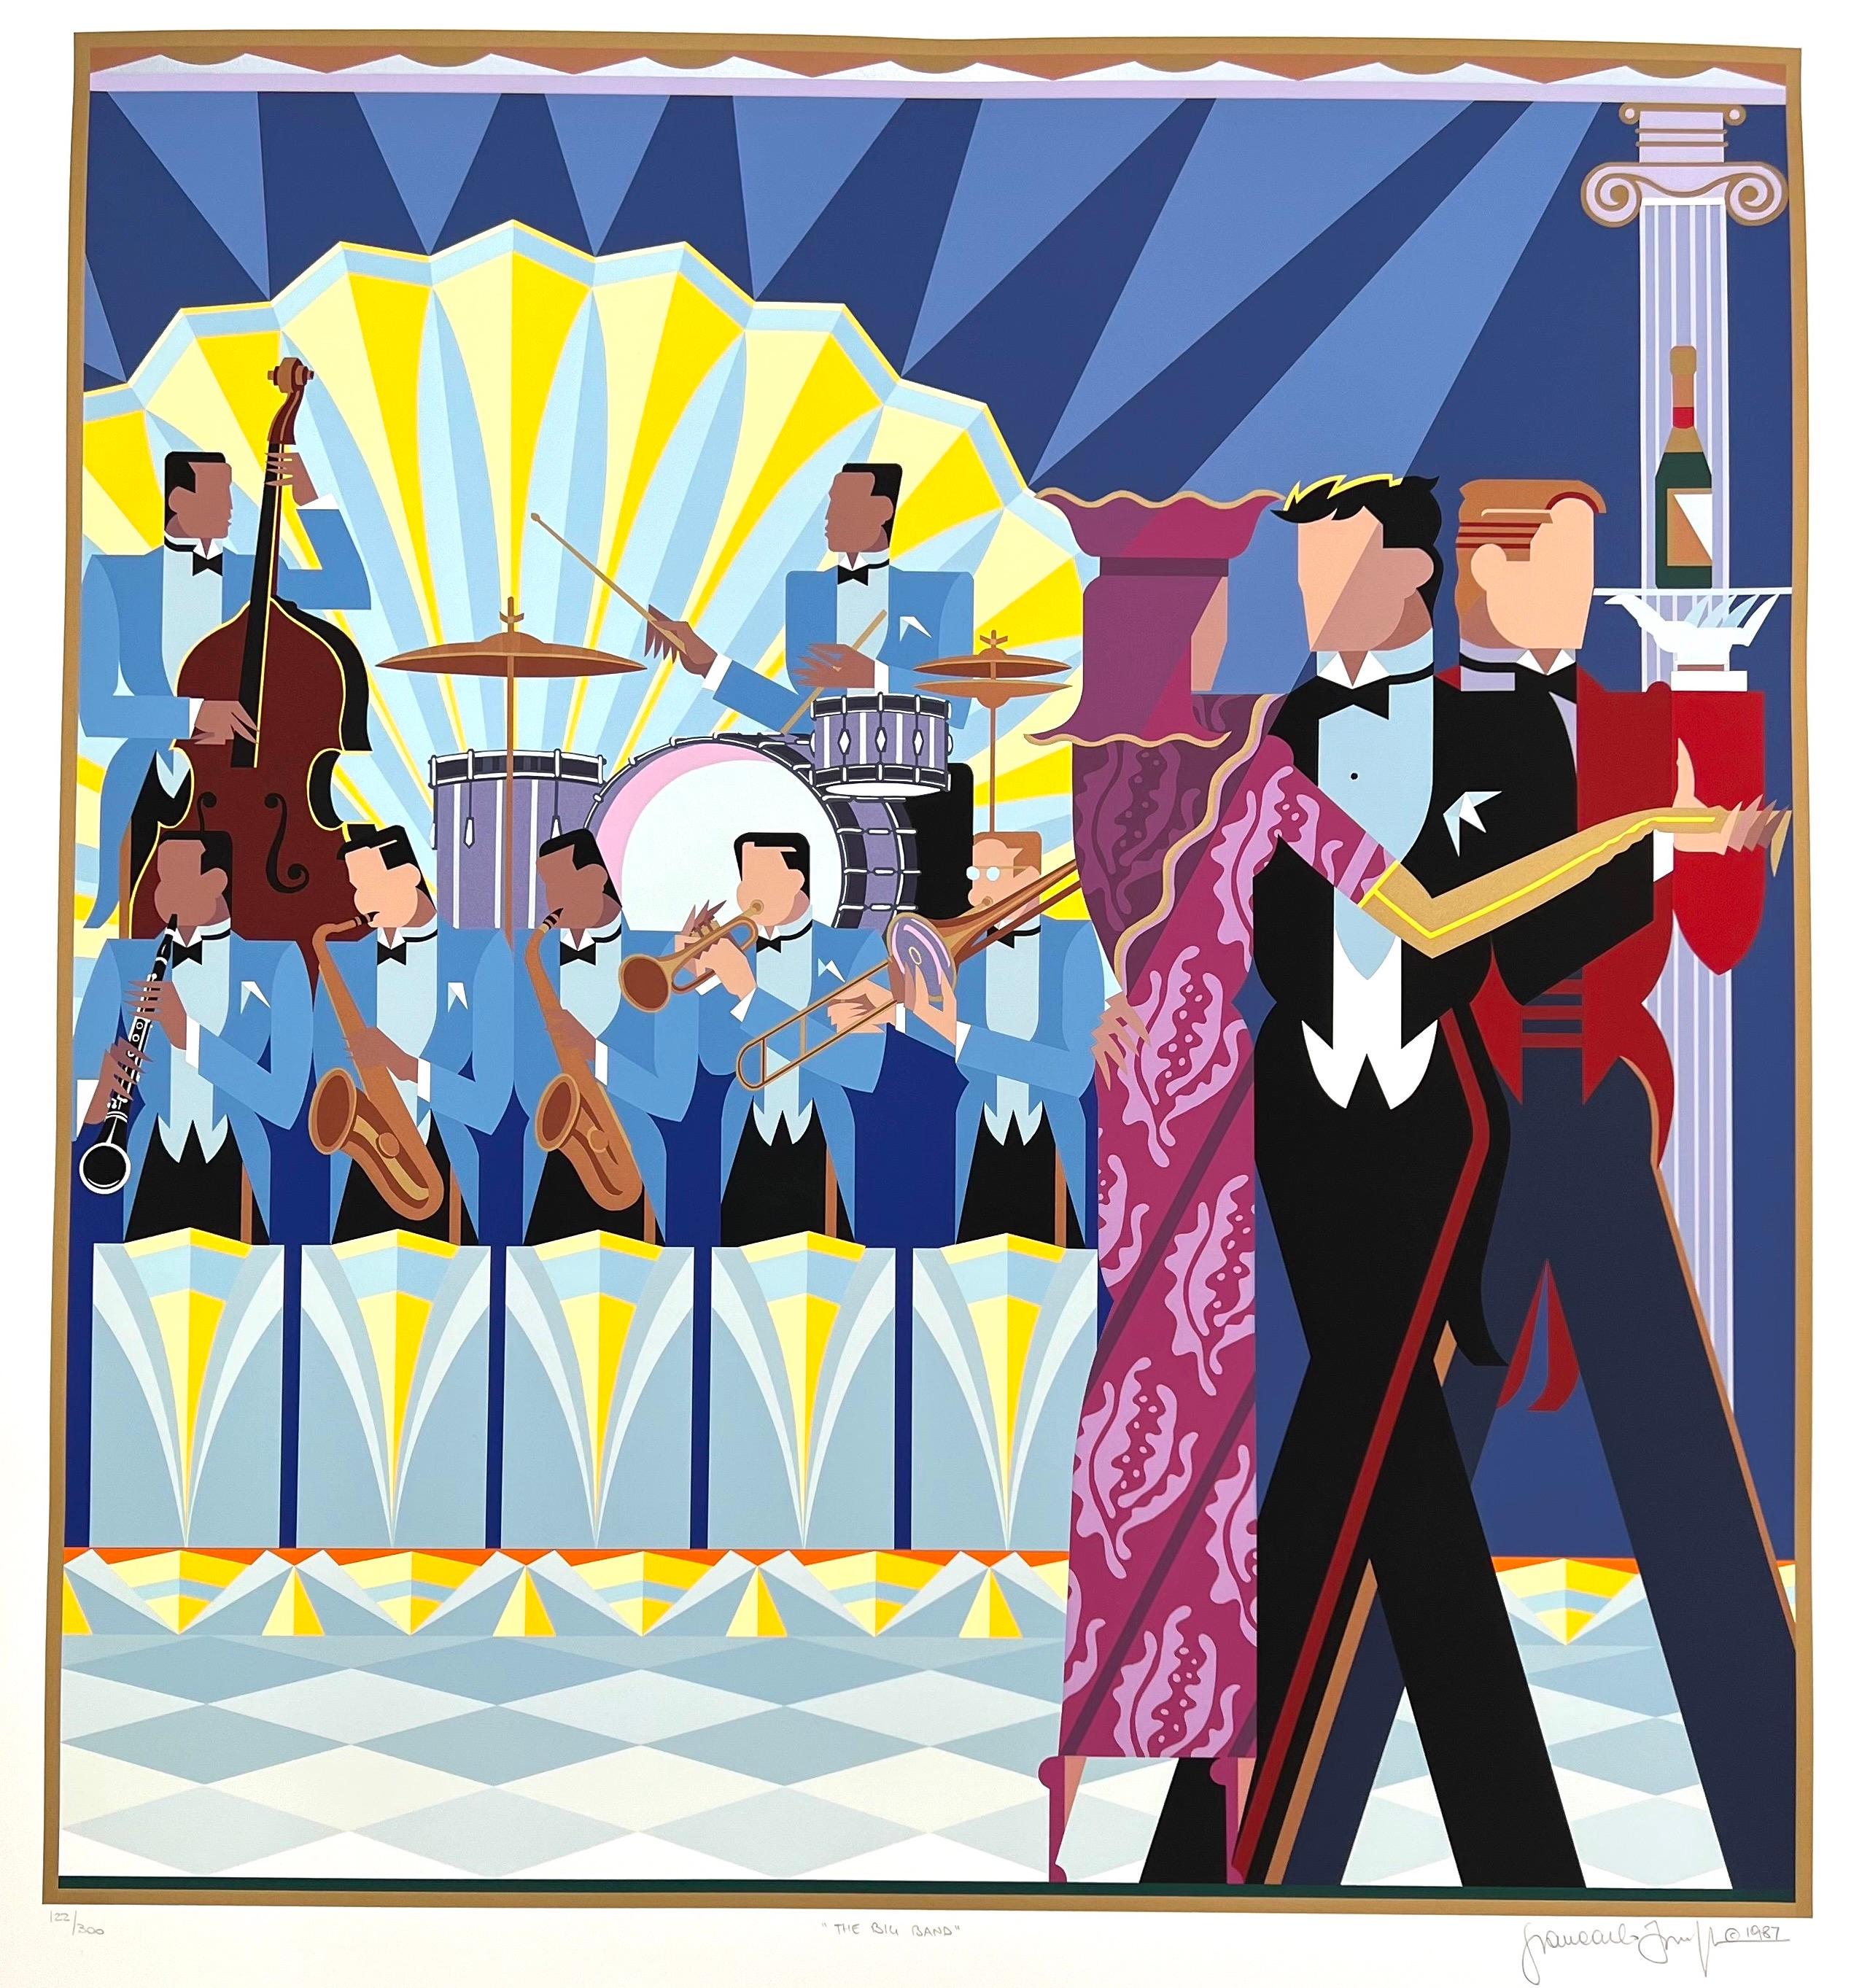 Giancarlo Impiglia Figurative Print - Rare serigraph "The Big Band" from the Cafe Society series